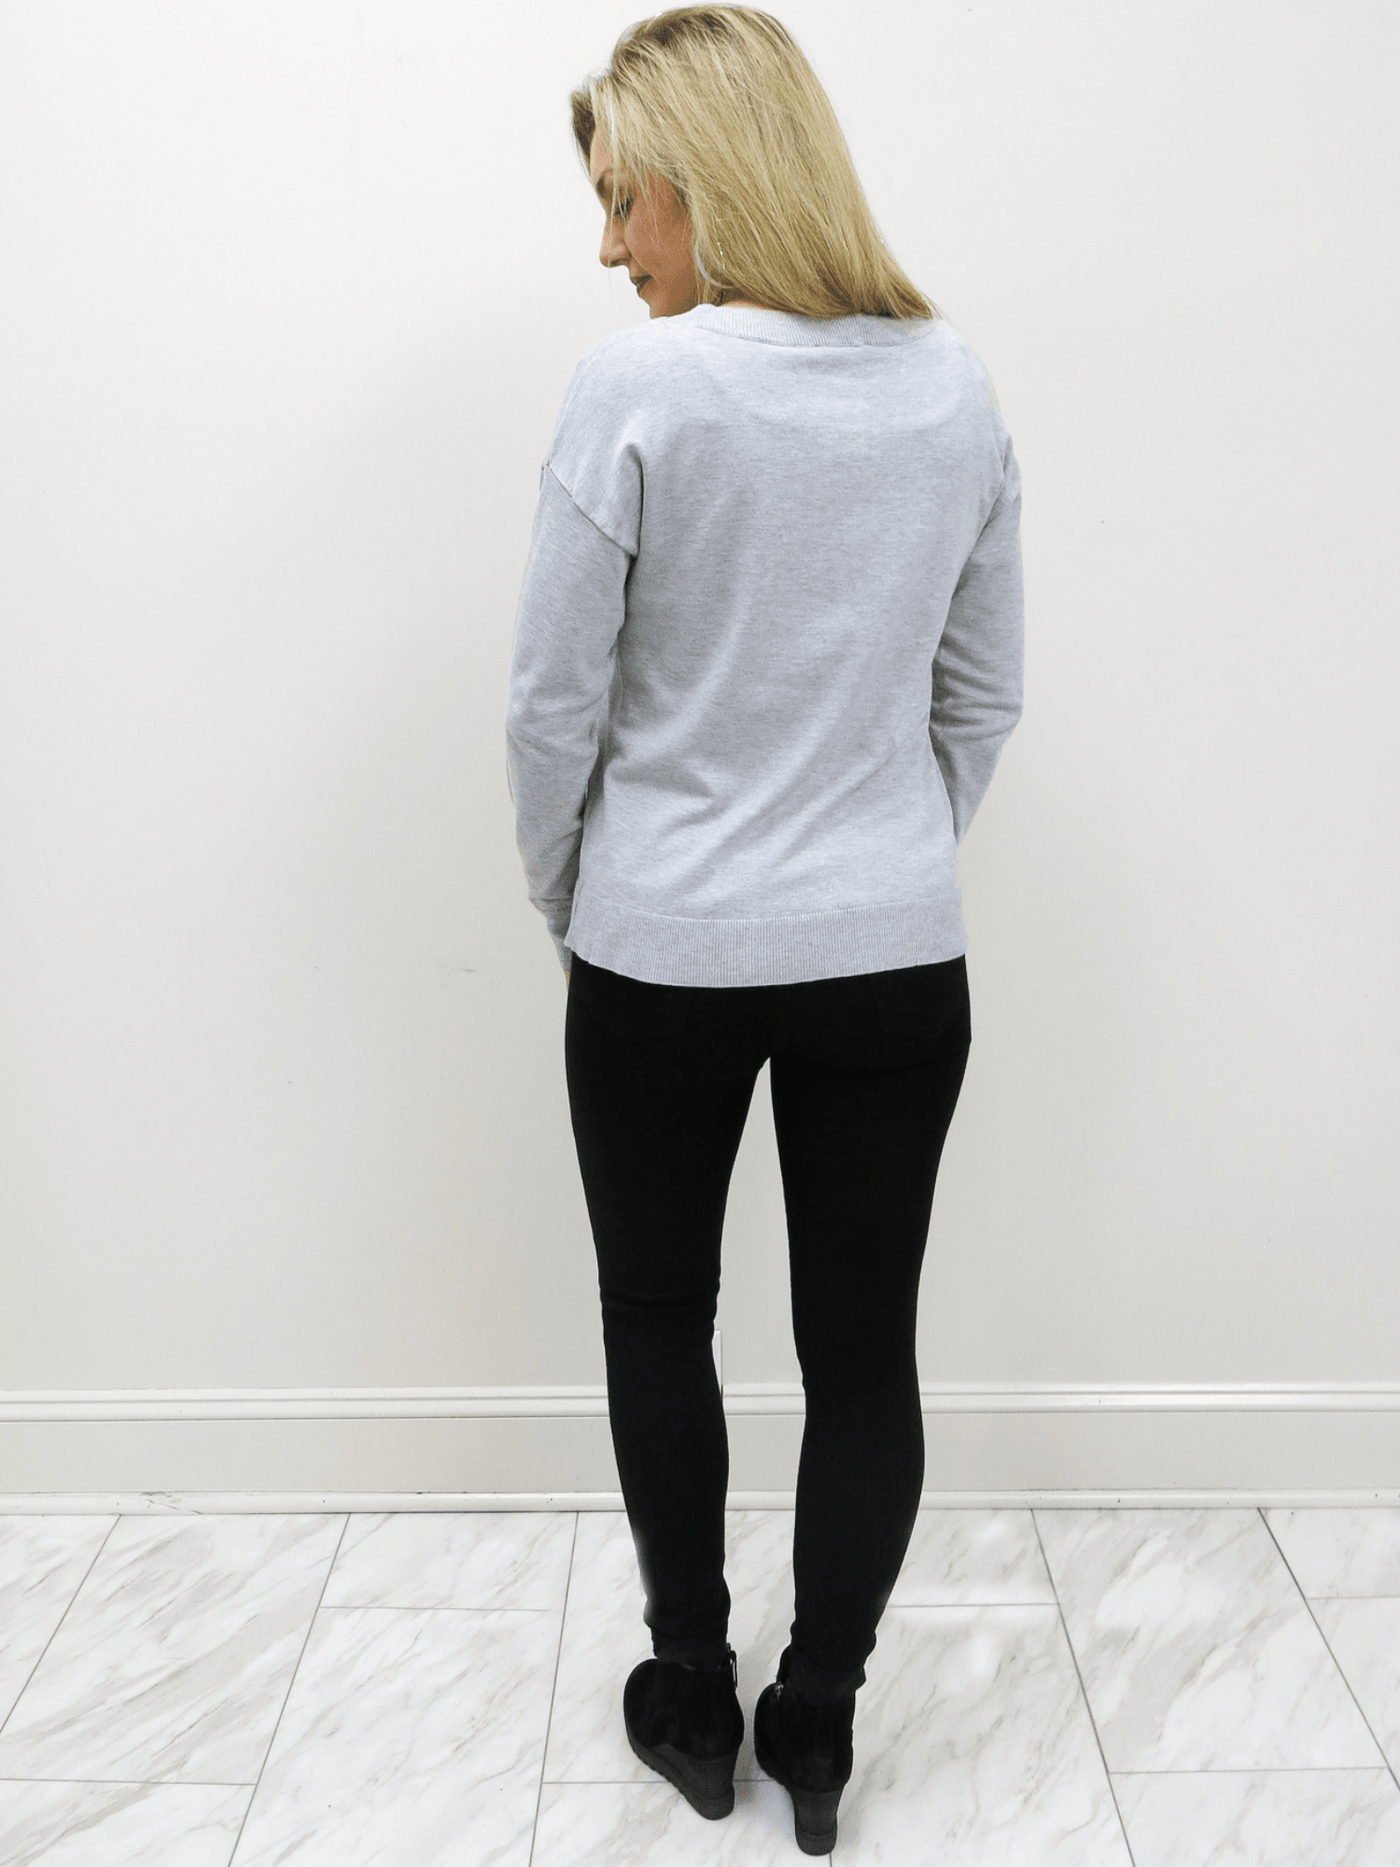 Just Black Denim black high rise skinny jean back view with black boots and Charlie Paige grey sweater.